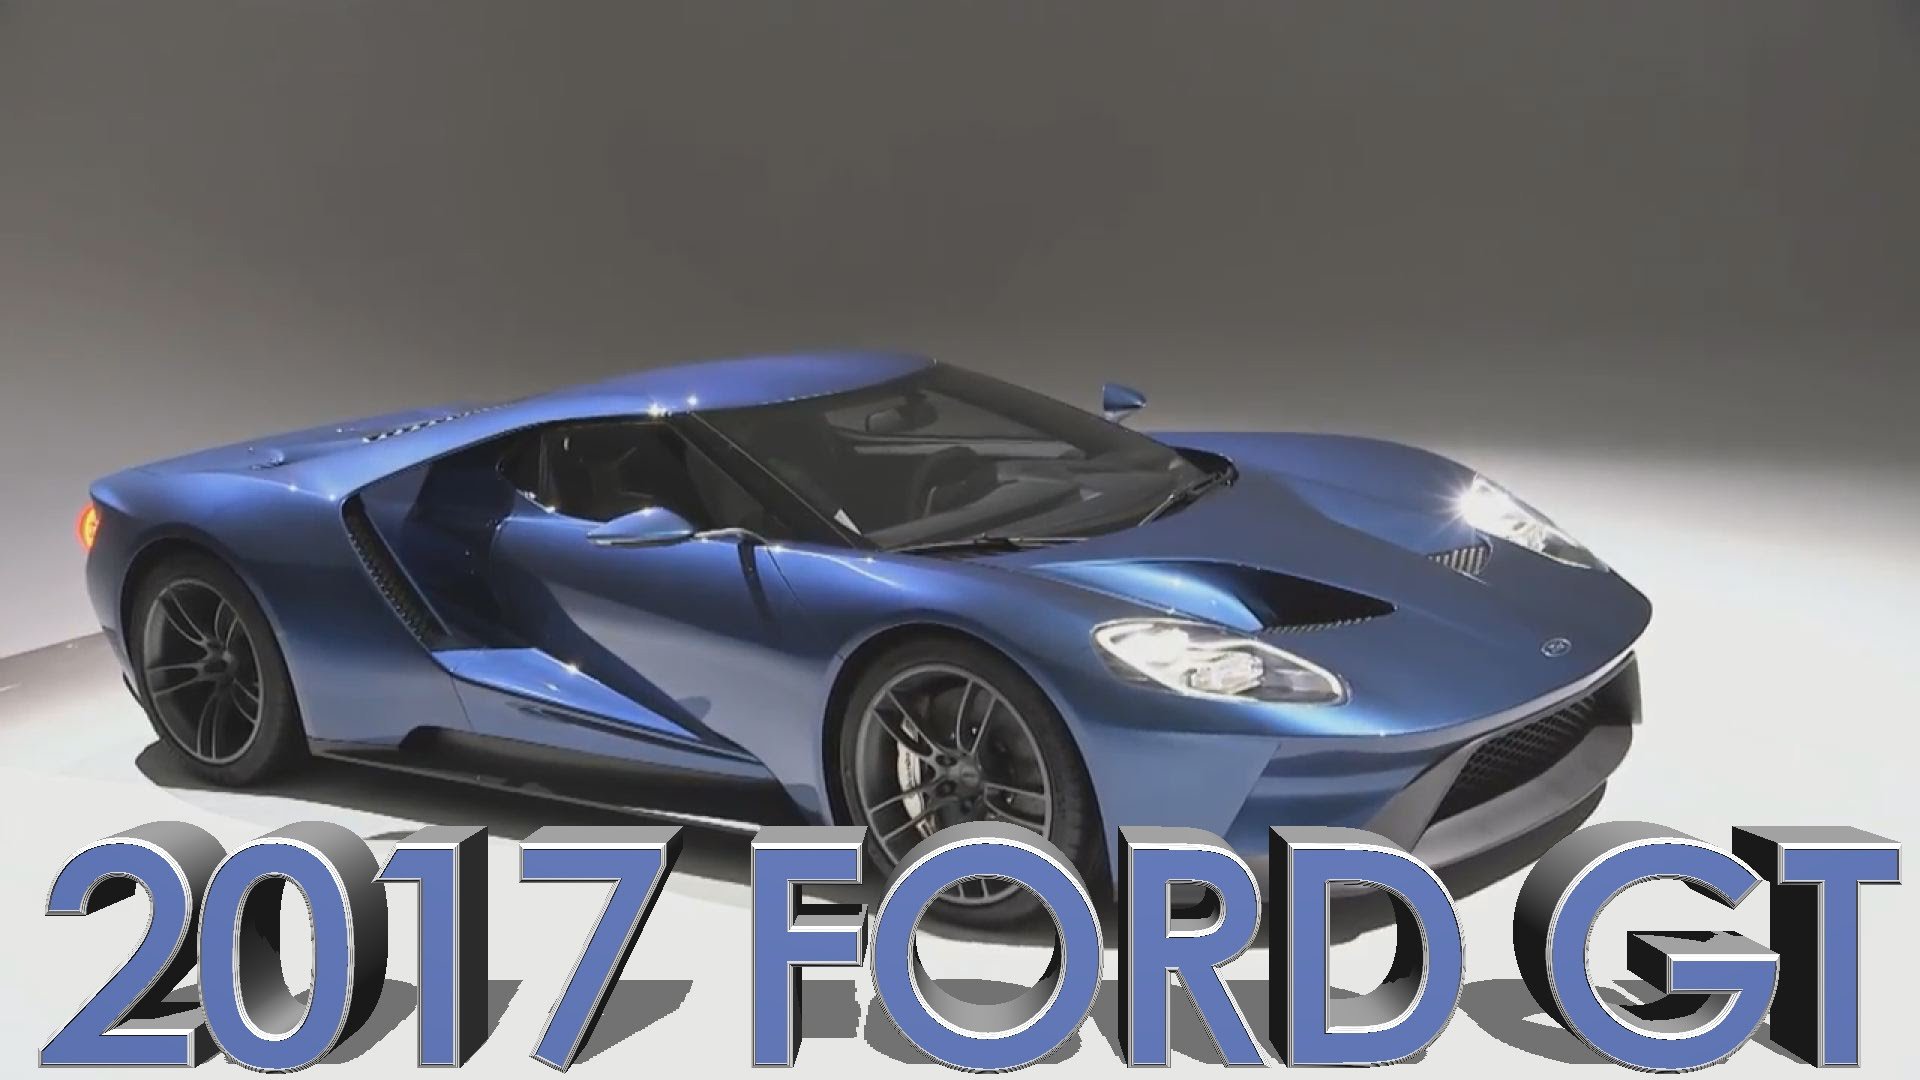 2017, Ford, G t, Muscle, Supercar Wallpaper